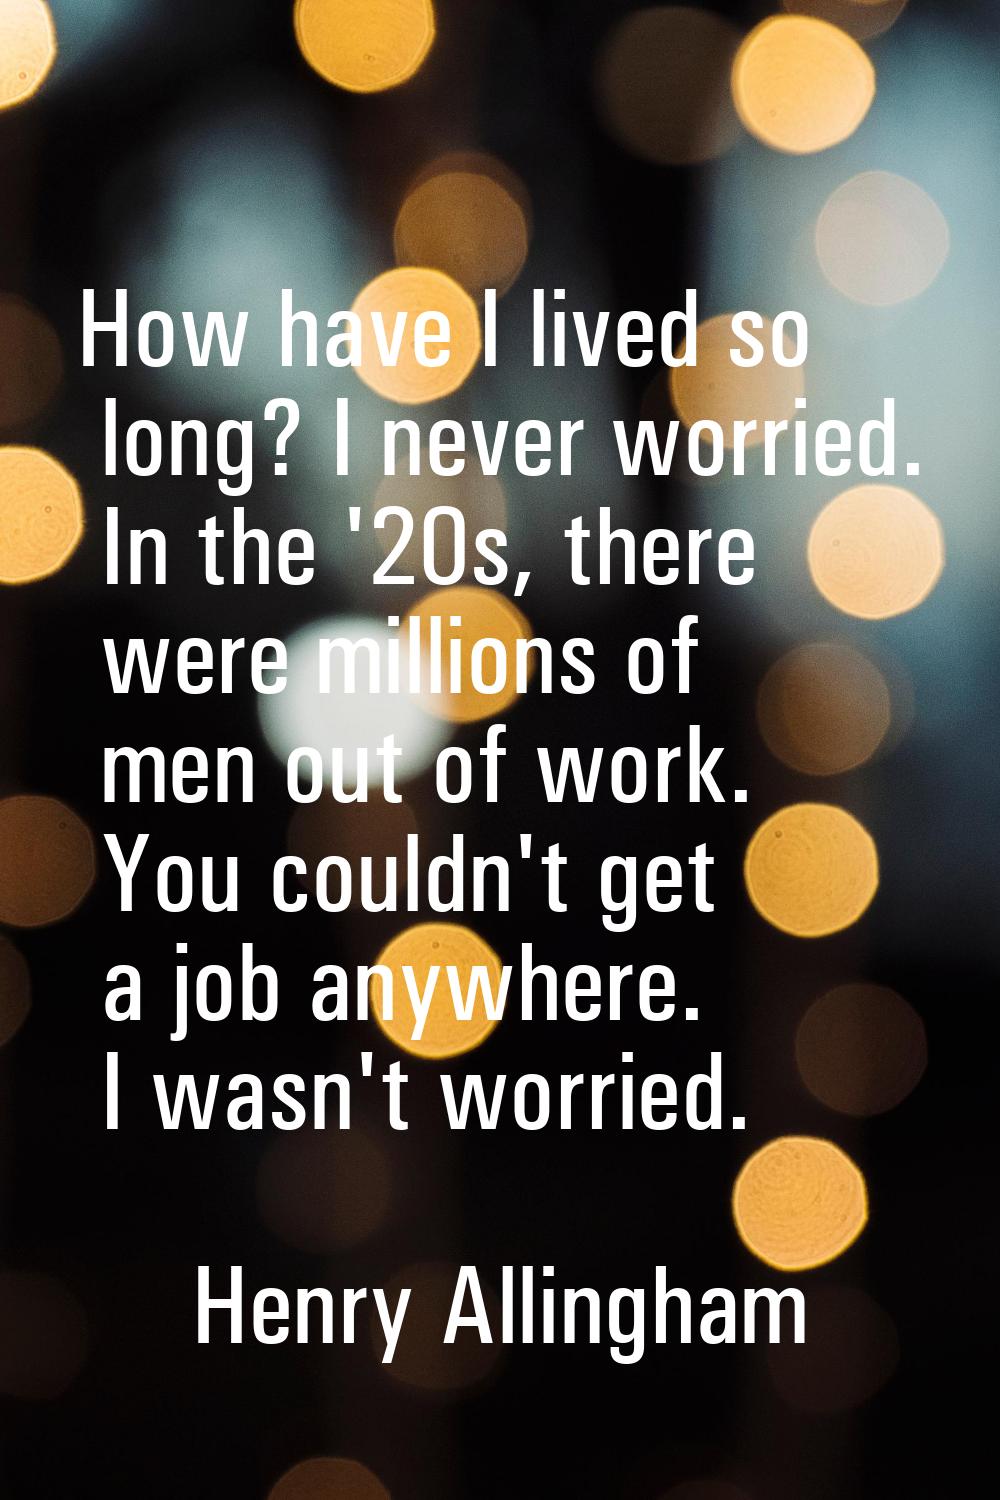 How have I lived so long? I never worried. In the '20s, there were millions of men out of work. You